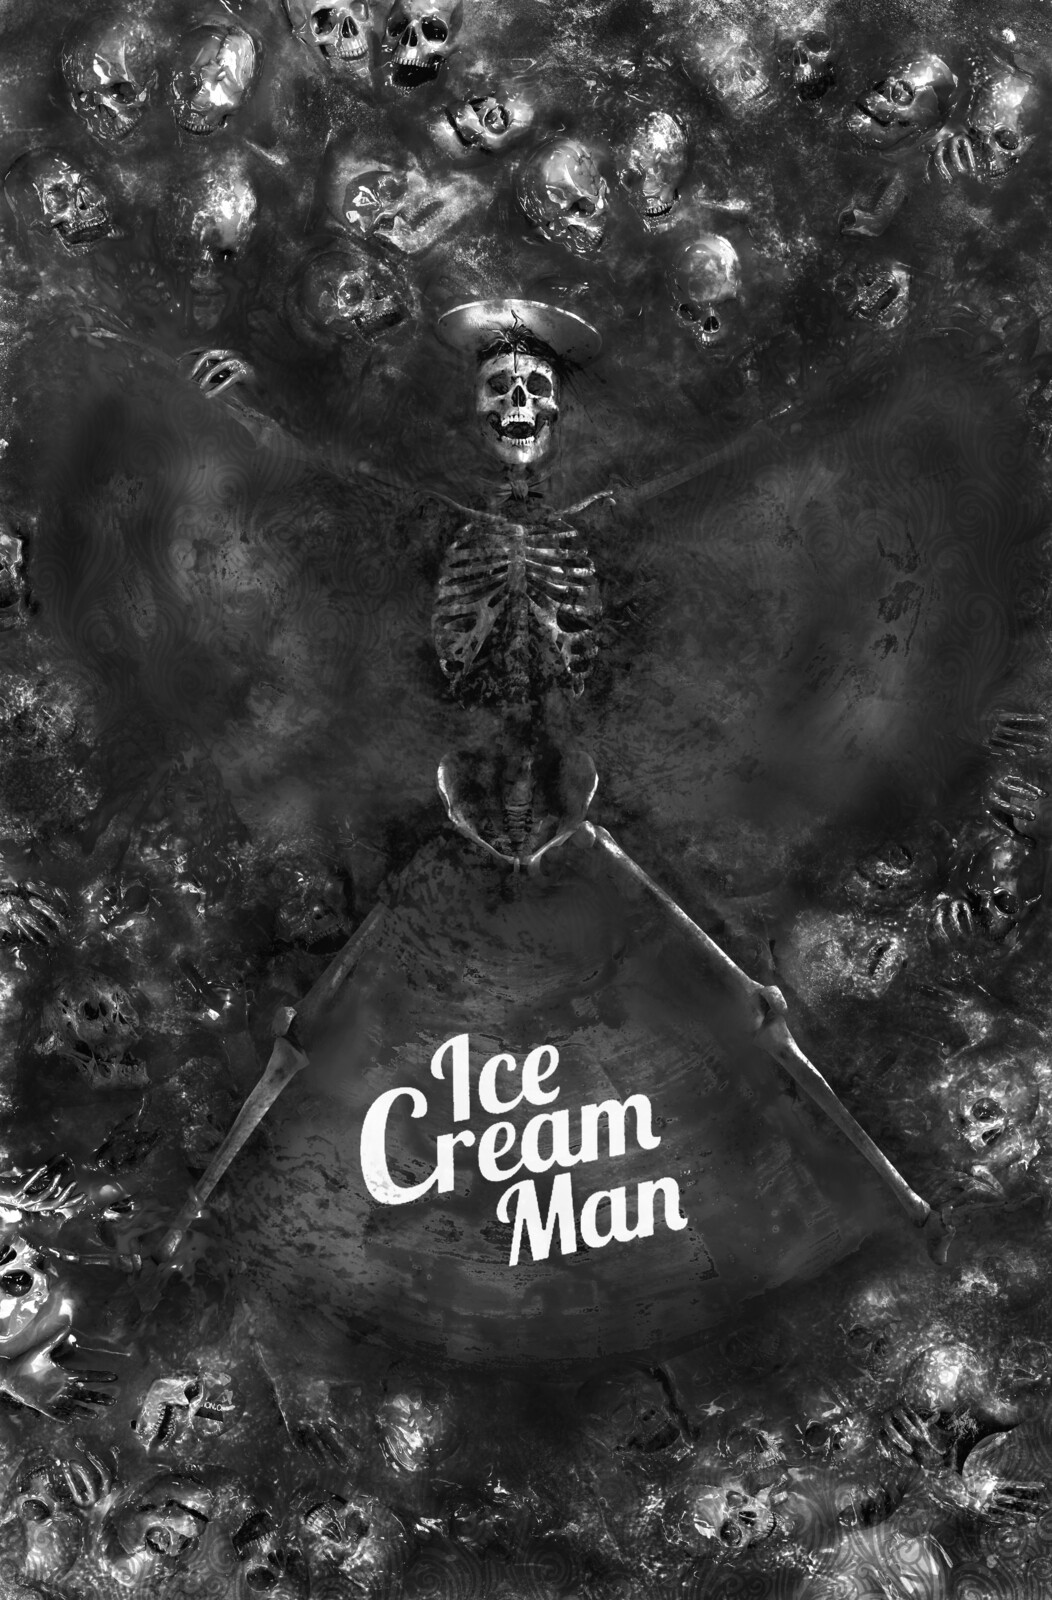 ICE CREAM MAN - BLACK AND WHITE
FAN ART by Christopher Bust